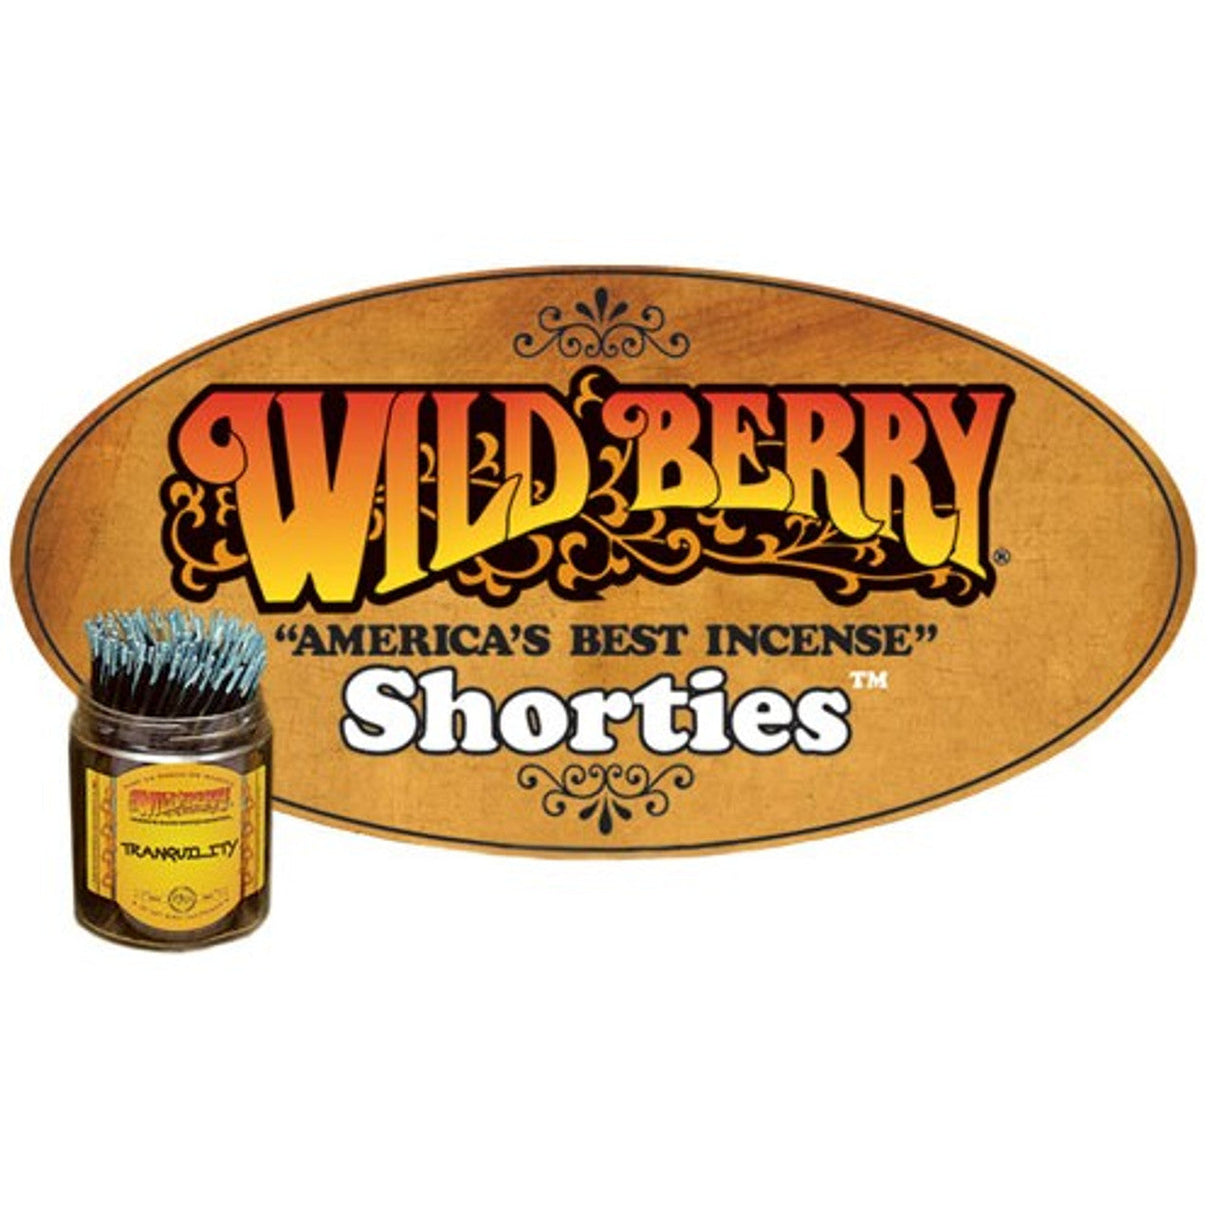 Wild Berry Shorties Incense Bundle of 100, compact 4" sticks in assorted colors, USA-made